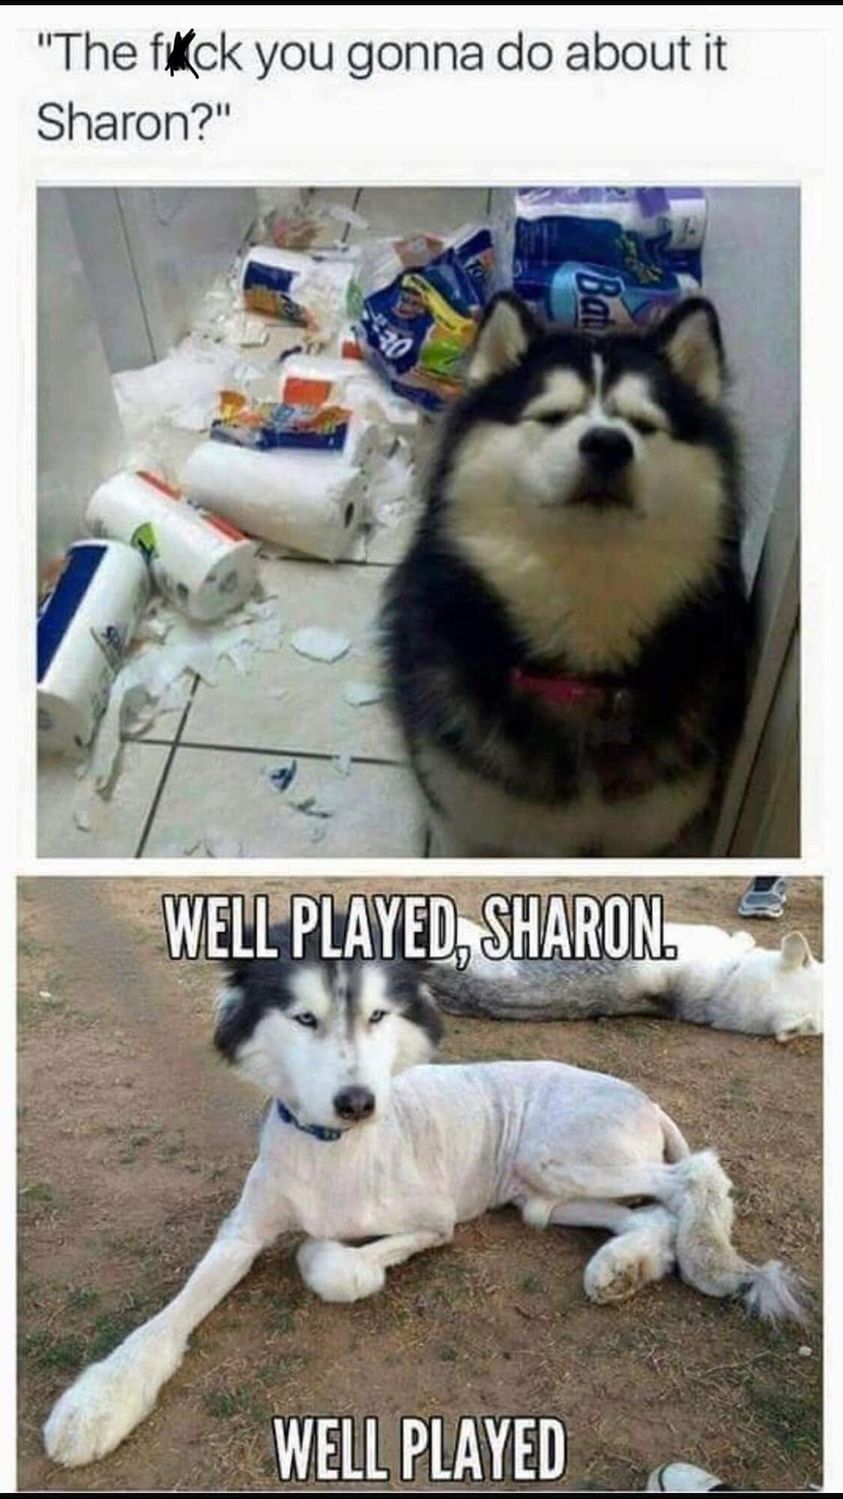 cool pics and memes - bad dog memes - "The fick you gonna do about it Sharon?" Bat Well Played, Sharon. Well Played